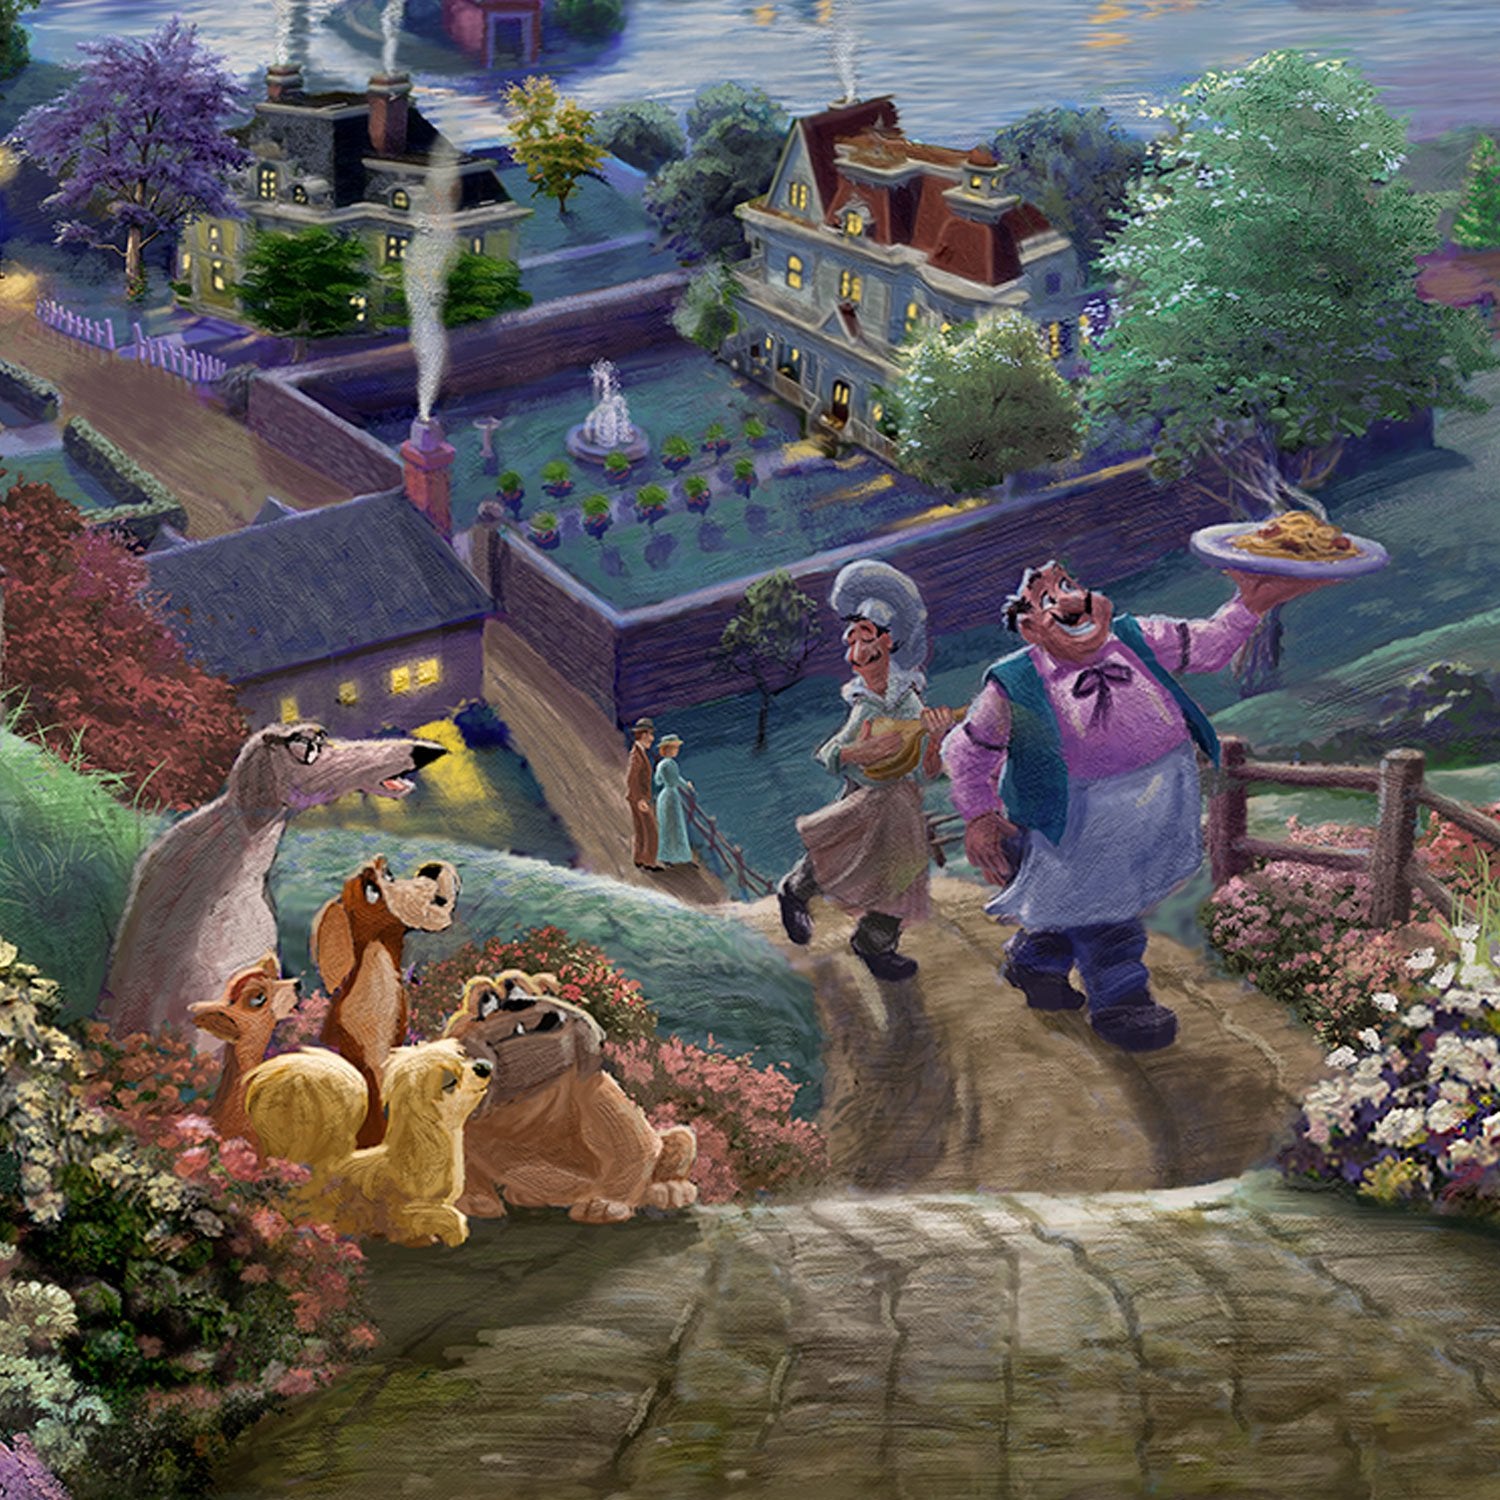 Tony and Joe head uphill towards Lady and the Tramp delivering a special meal - closeup